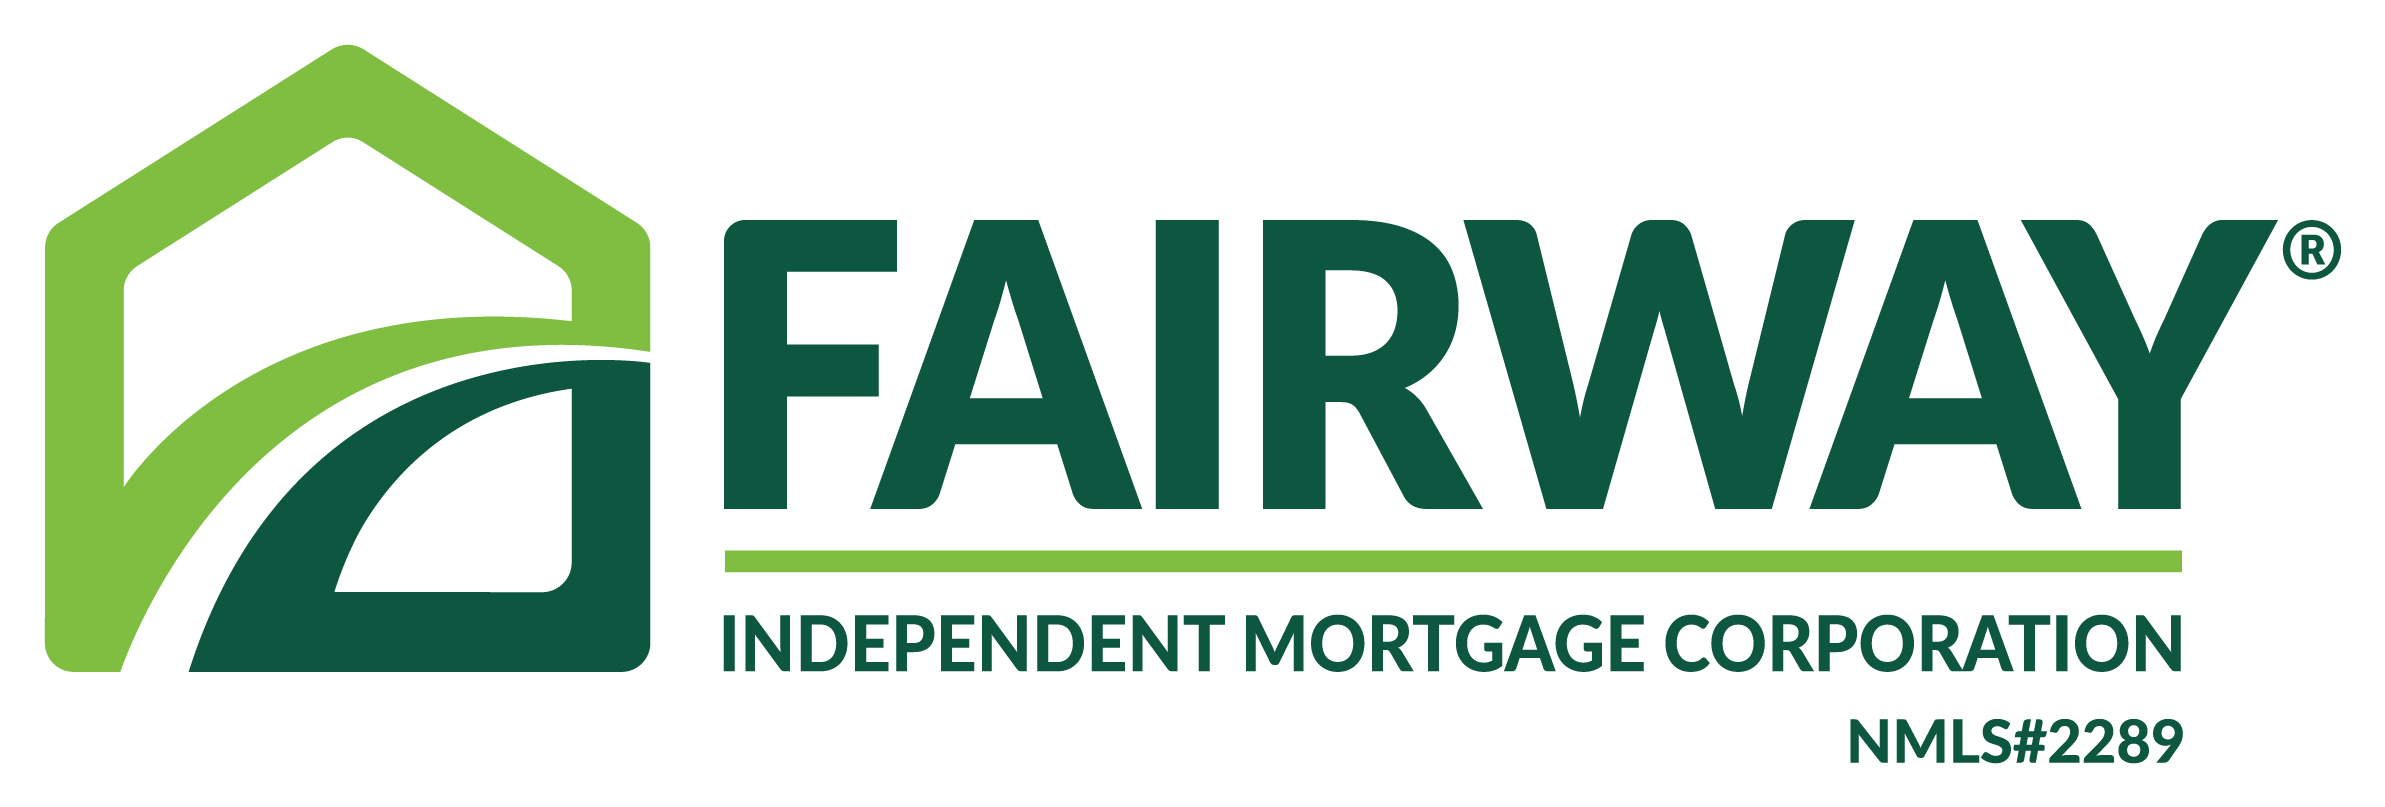 Fairway Independent Mortgage Corporation Company Logo